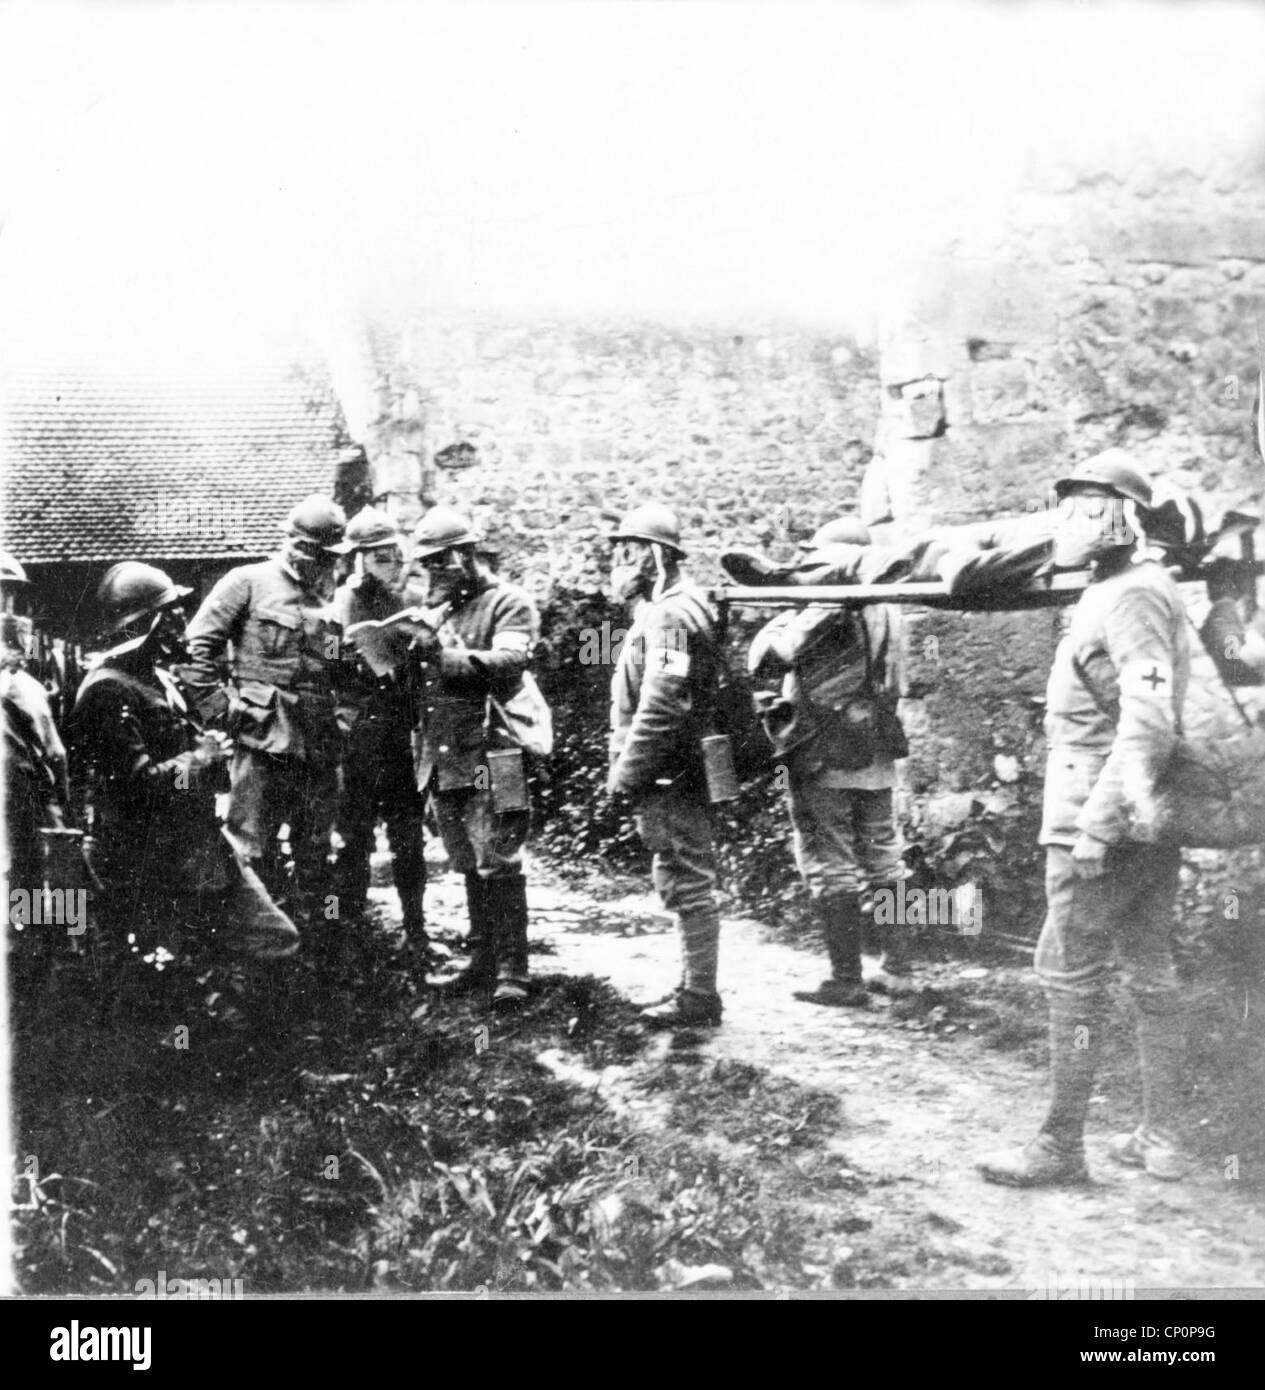 Wounded being treated during a wartime gas attack Stock Photo